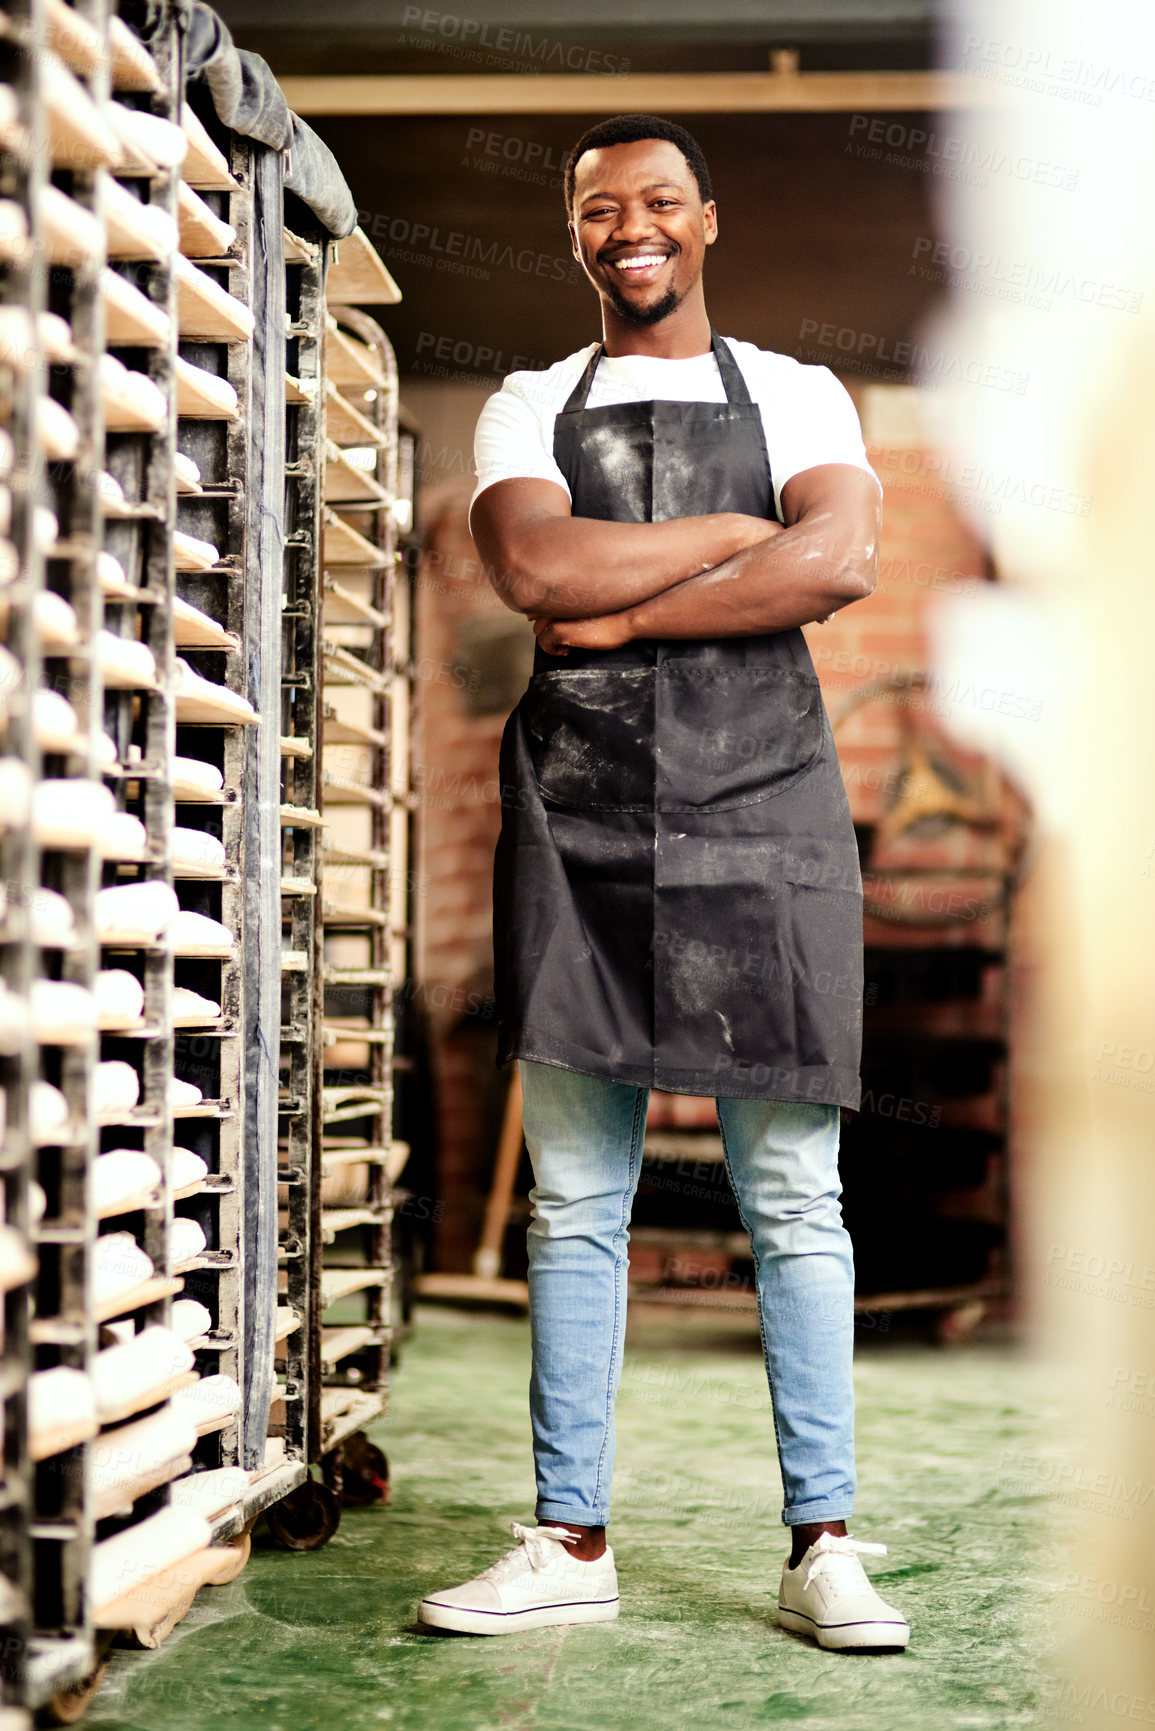 Buy stock photo Shot of a confident young man working in a bakery